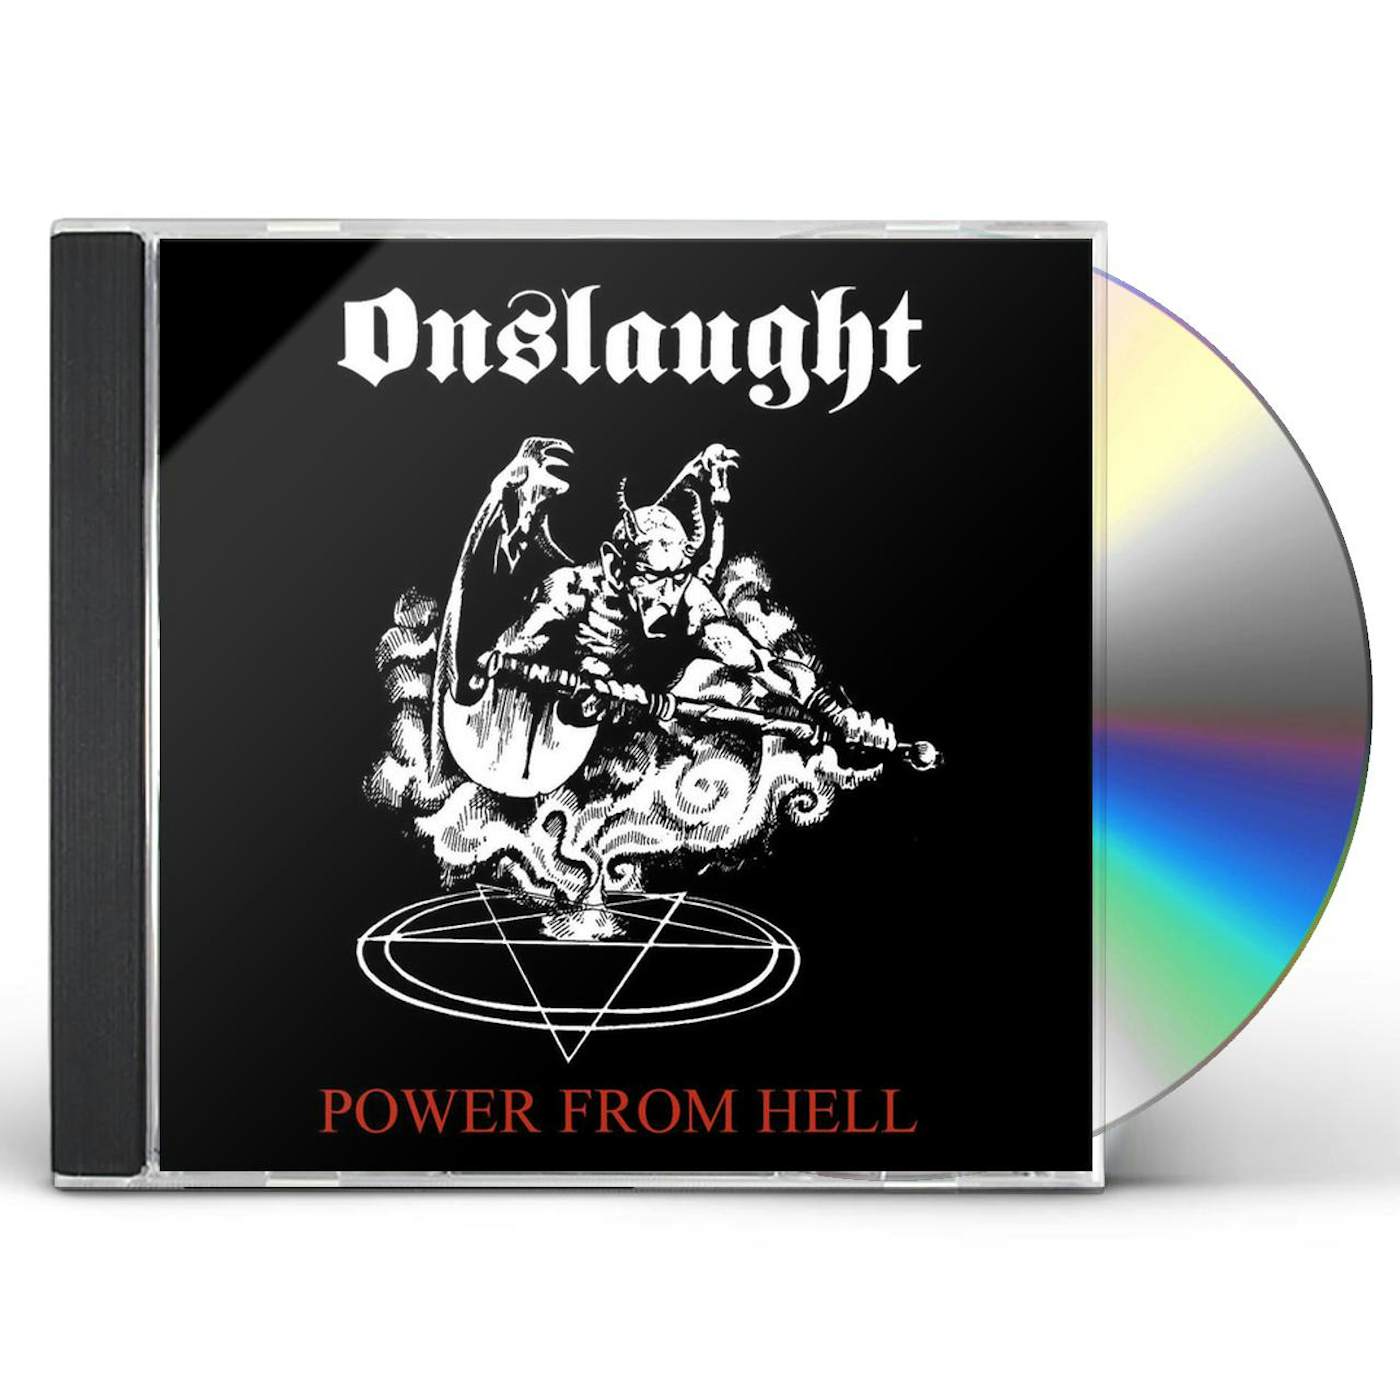 Onslaught POWER FROM HELL CD